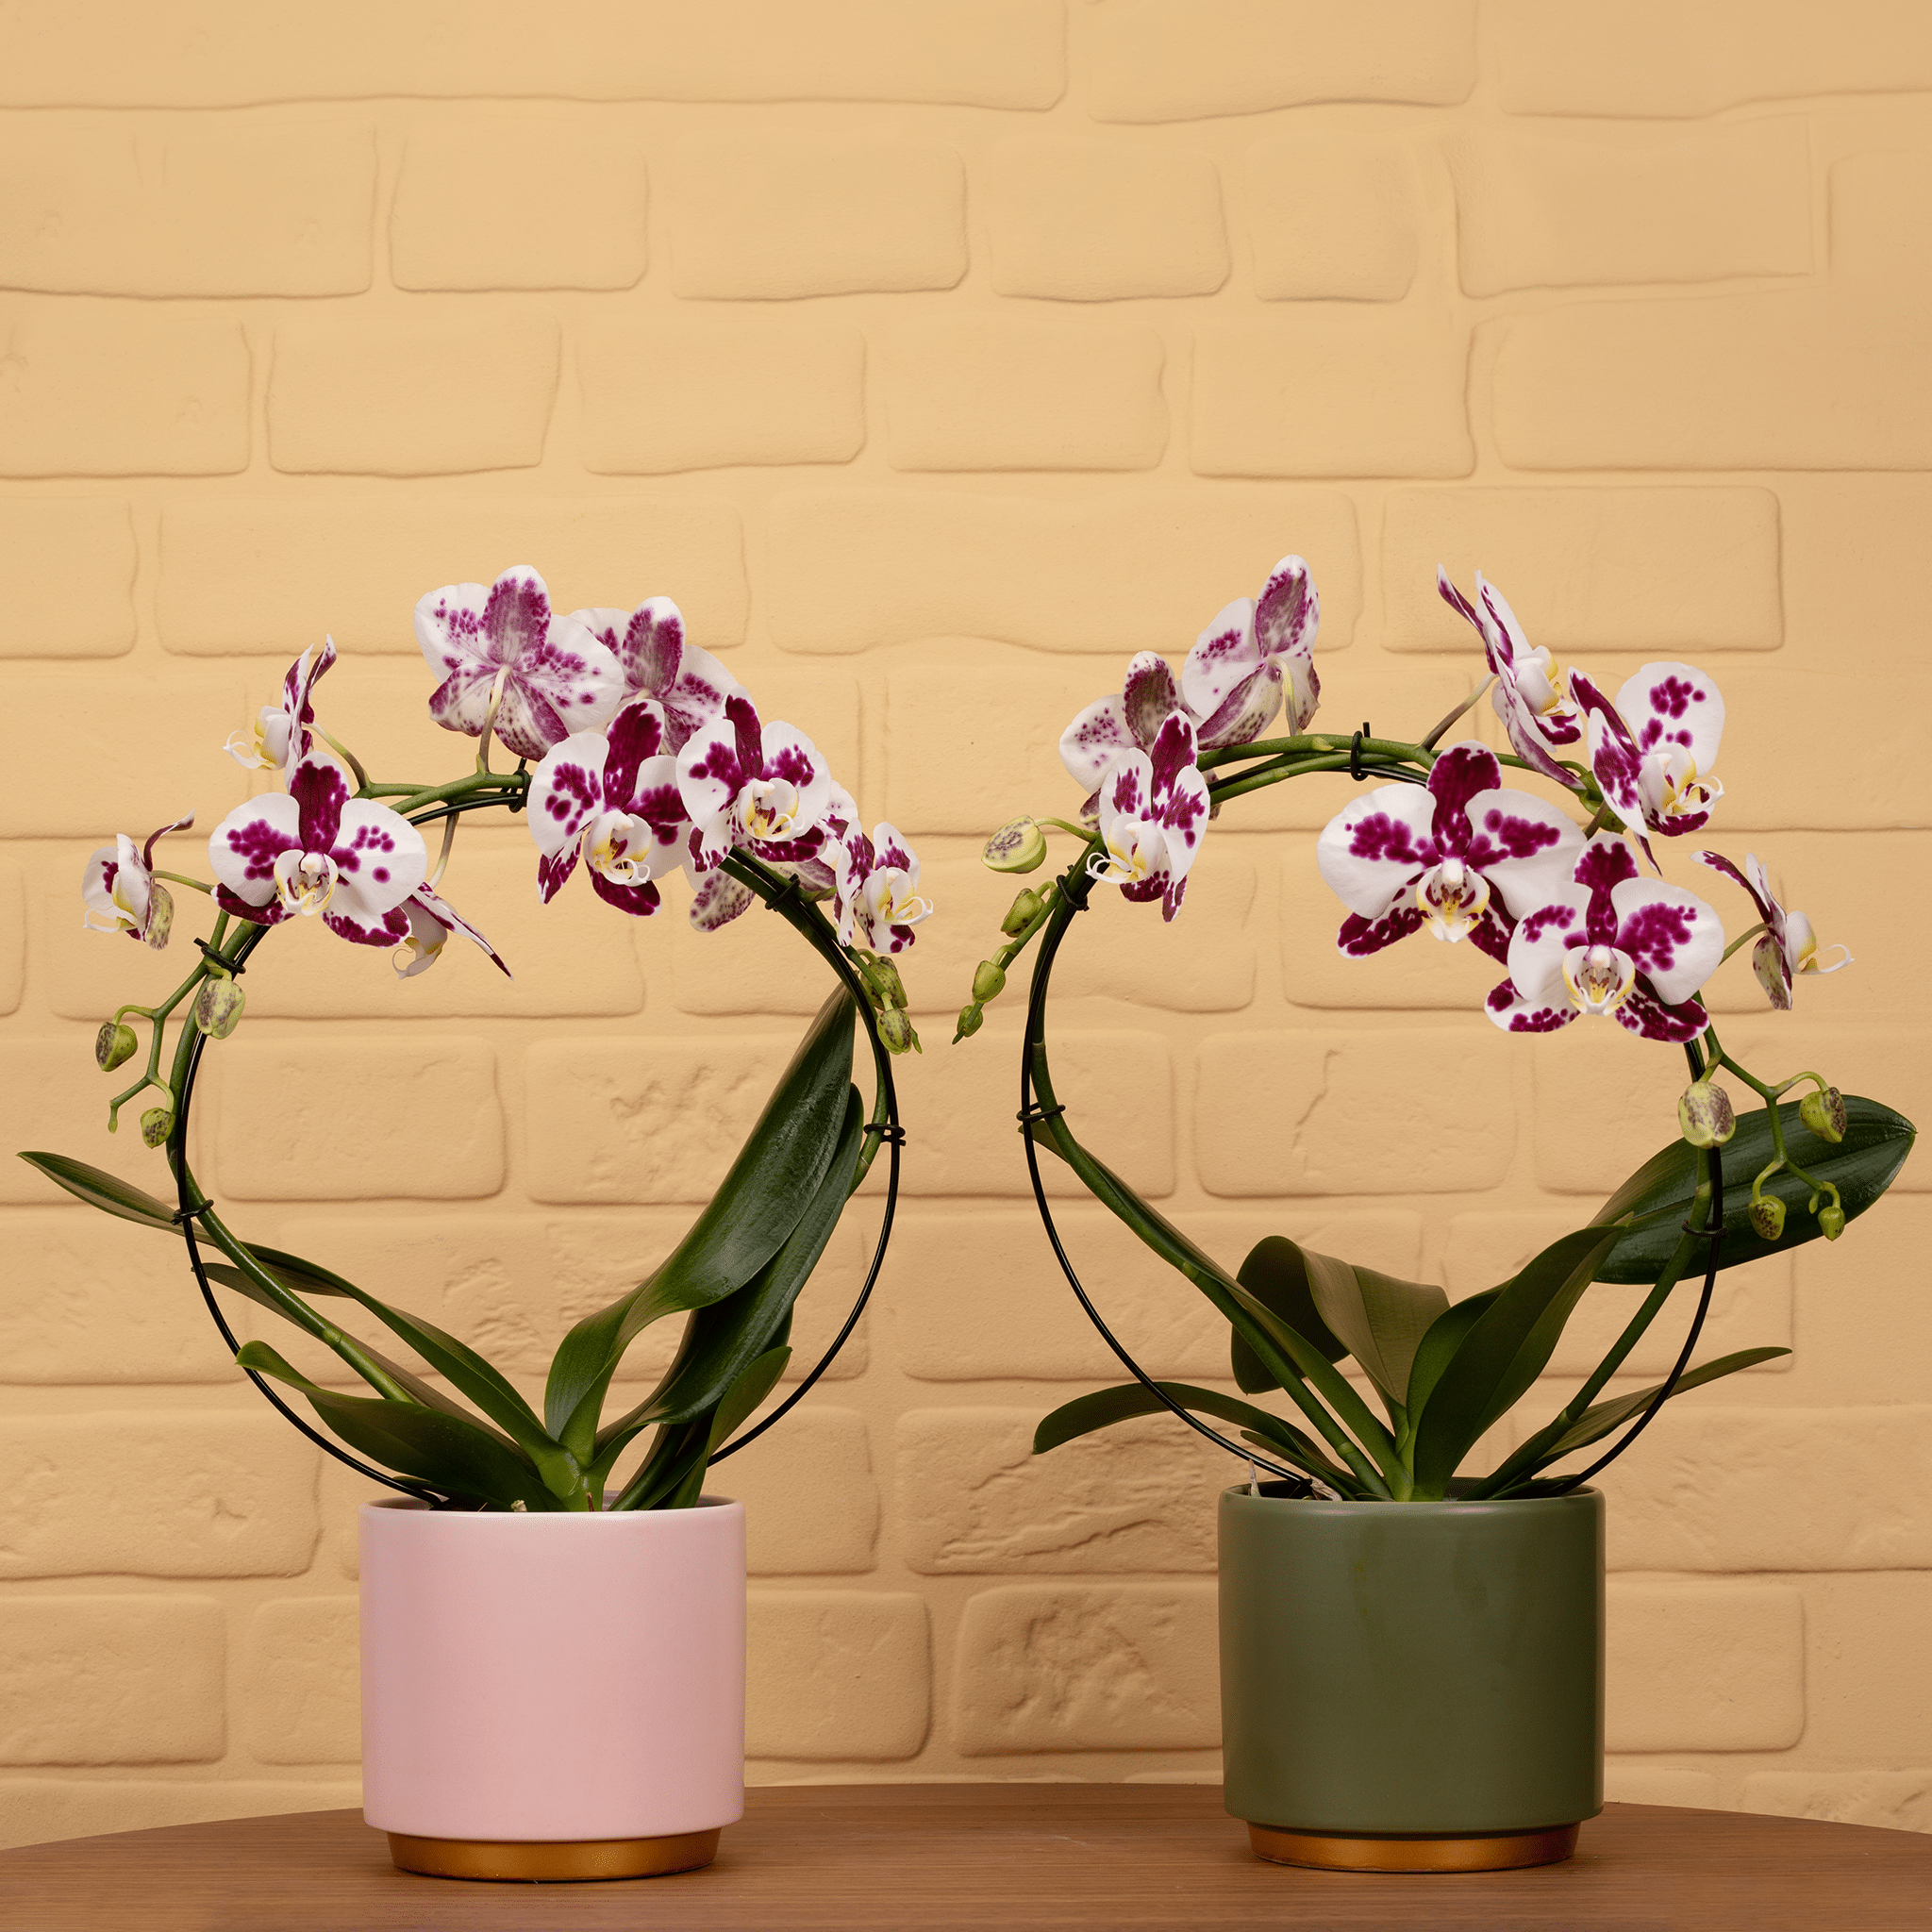 Downton: Large Hoop Orchid In Ceramic - Love Orchids